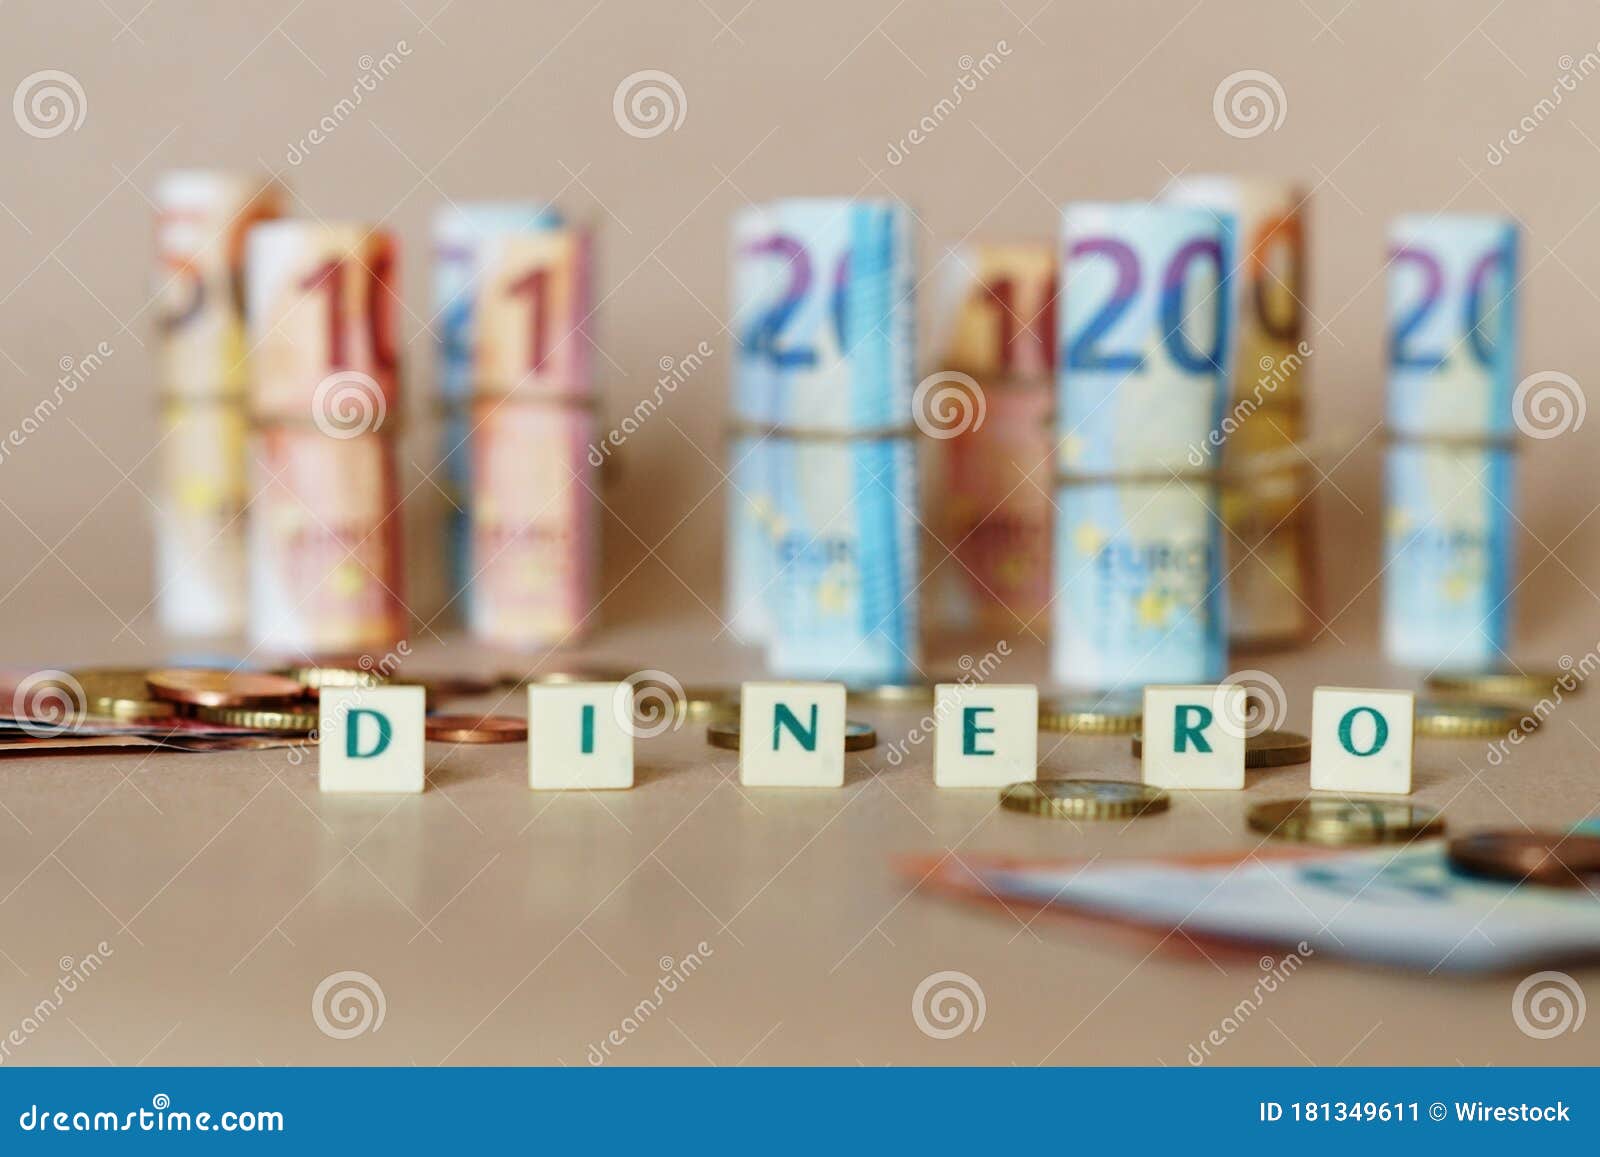 cubes spelling dinero in front of spanish dinero bills and coins on the table